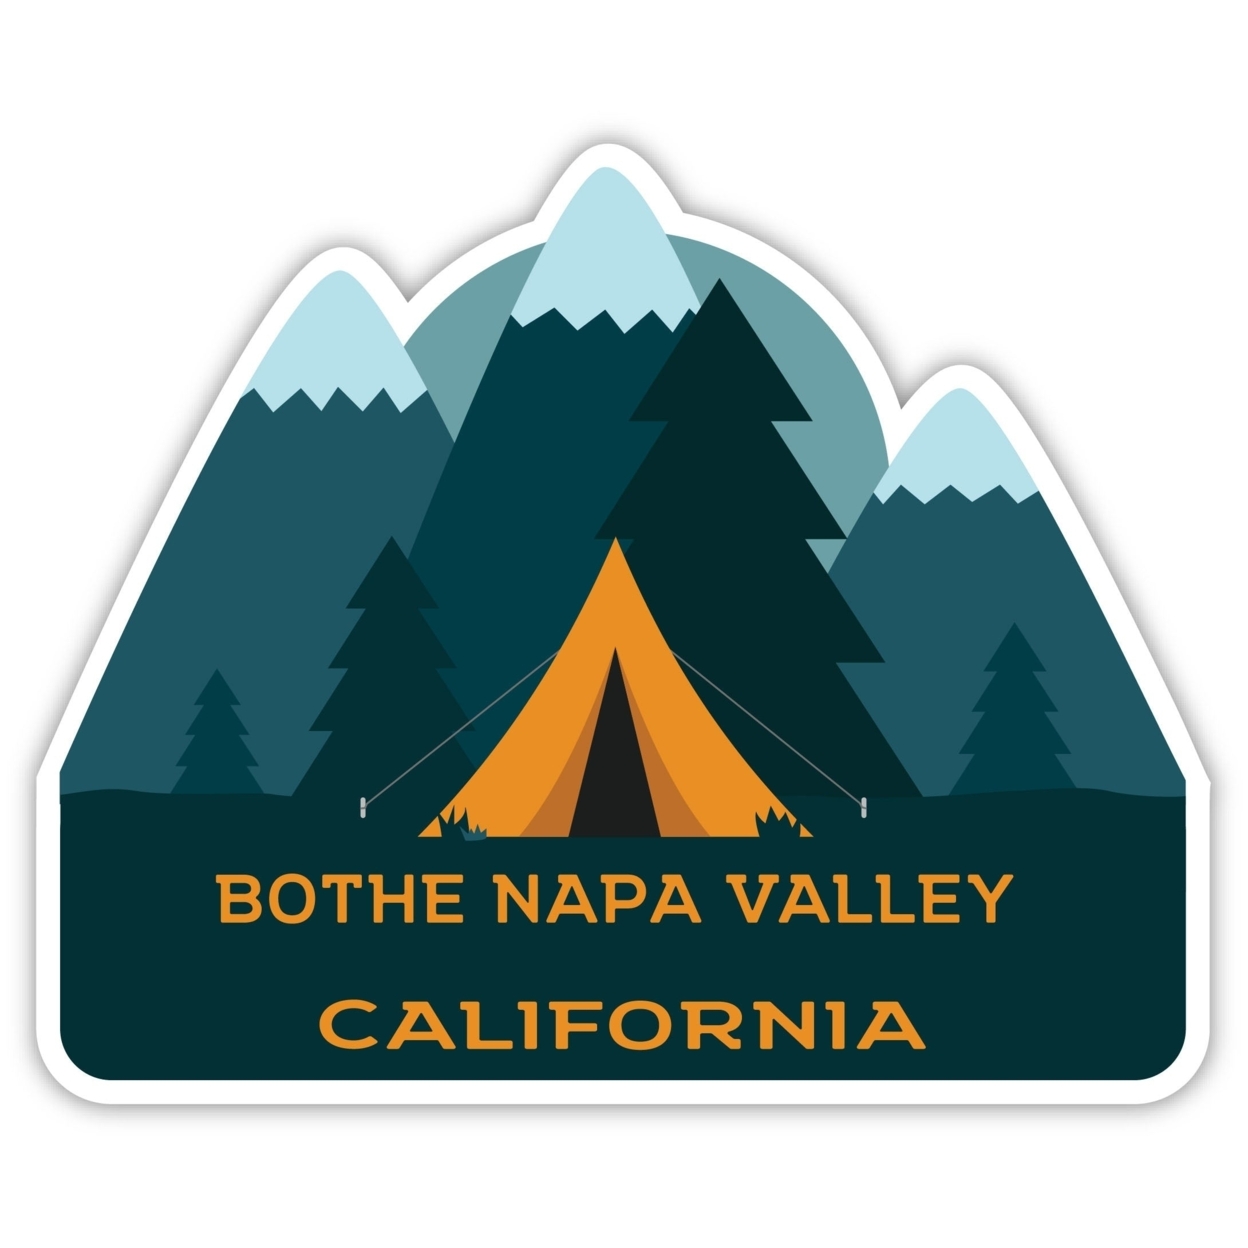 Bothe Napa Valley California Souvenir Decorative Stickers (Choose Theme And Size) - 4-Pack, 10-Inch, Tent